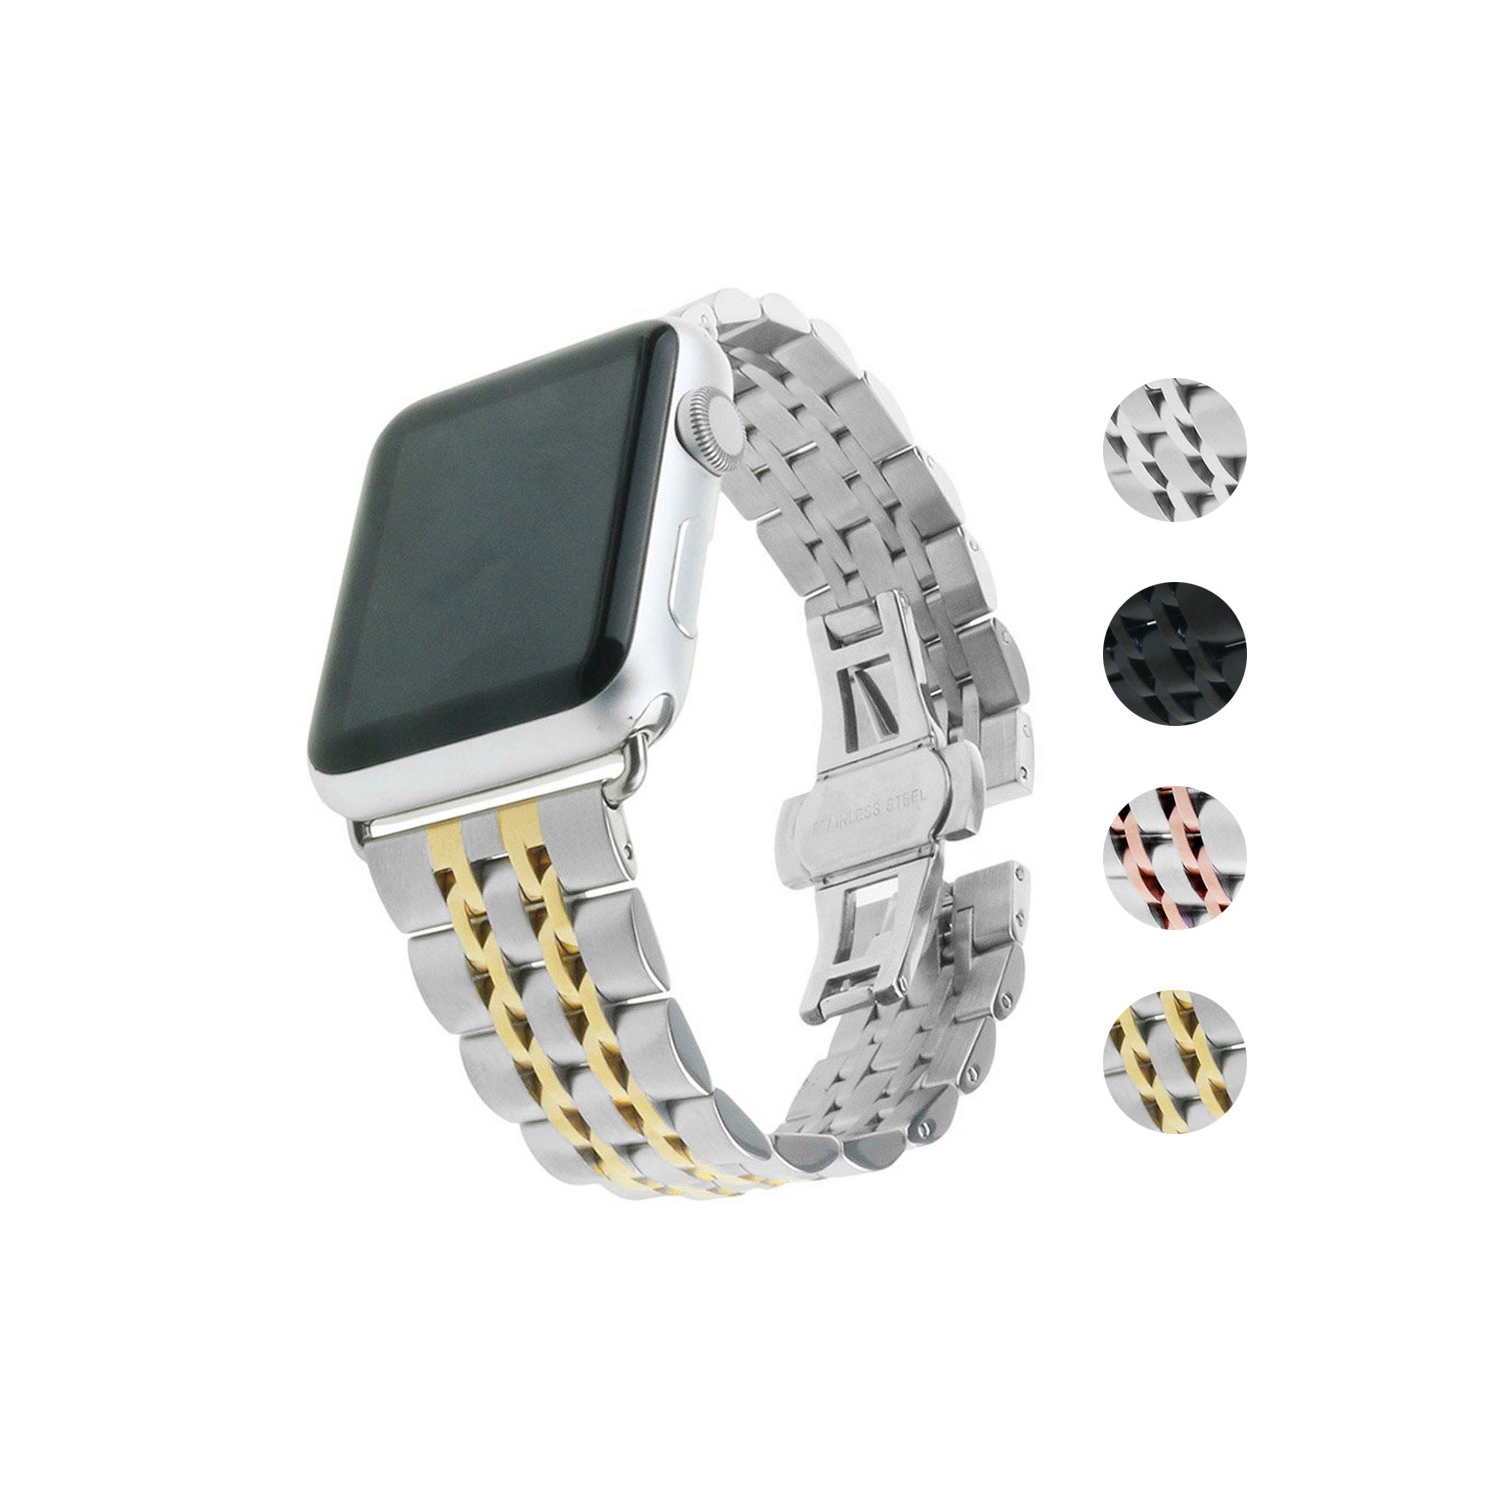 StrapsCo Stainless Steel Link Watch Band Strap for Apple Watch Series 1/2/3/4 - 42mm - Silver & Yellow Gold